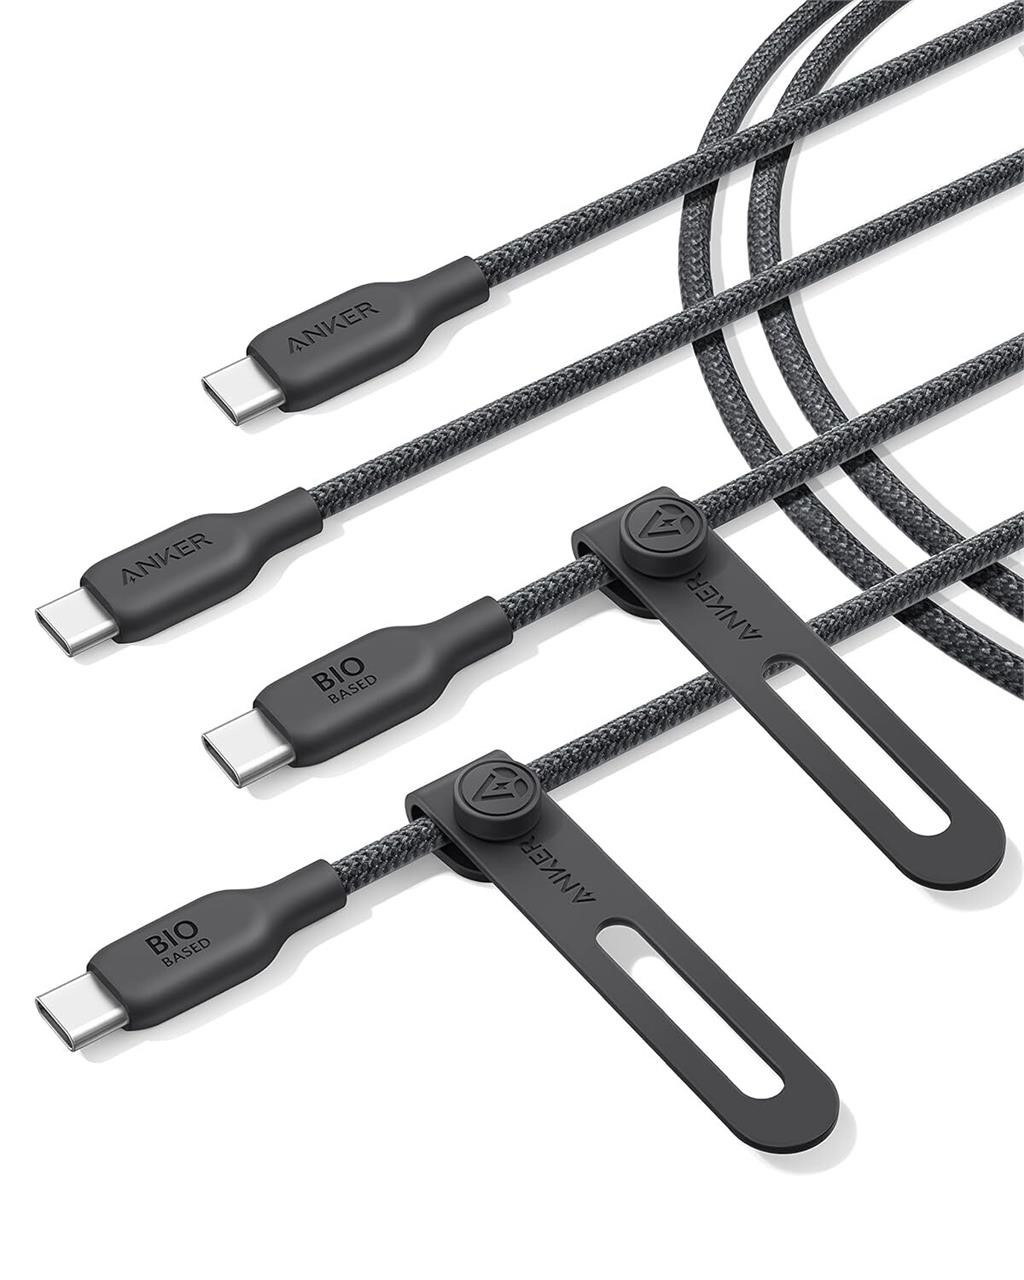 Anker USB C Cable 2 Pack. (240W,6ft)